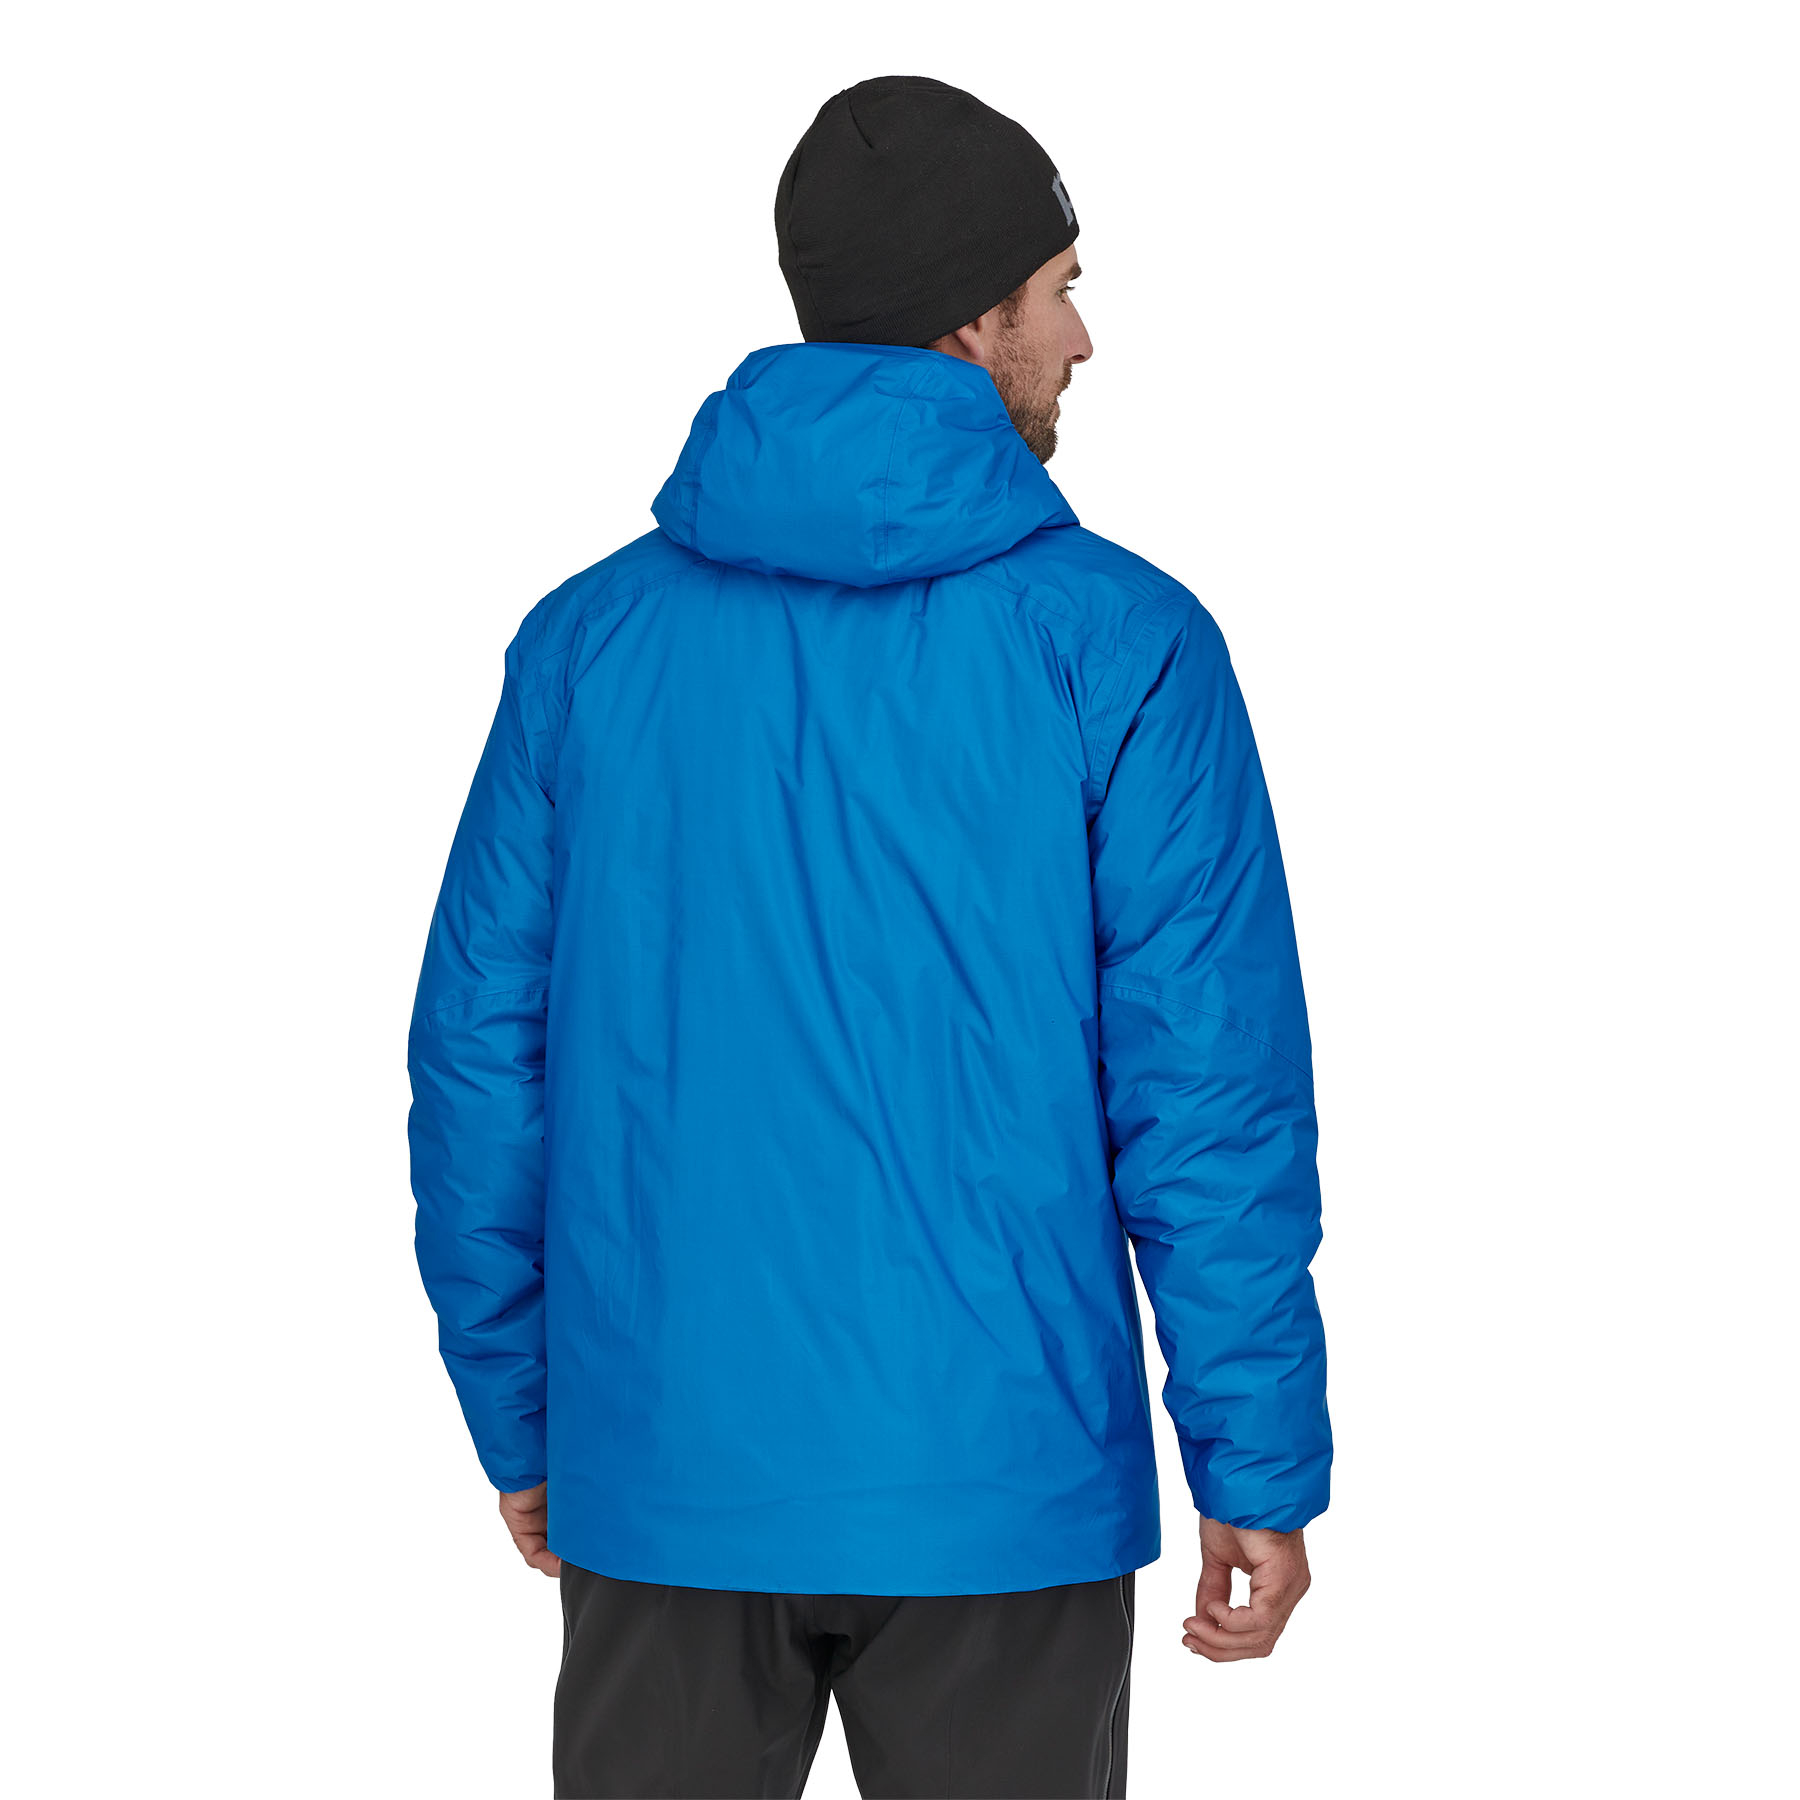 M's Micropuff Storm Jacket (andes blue)